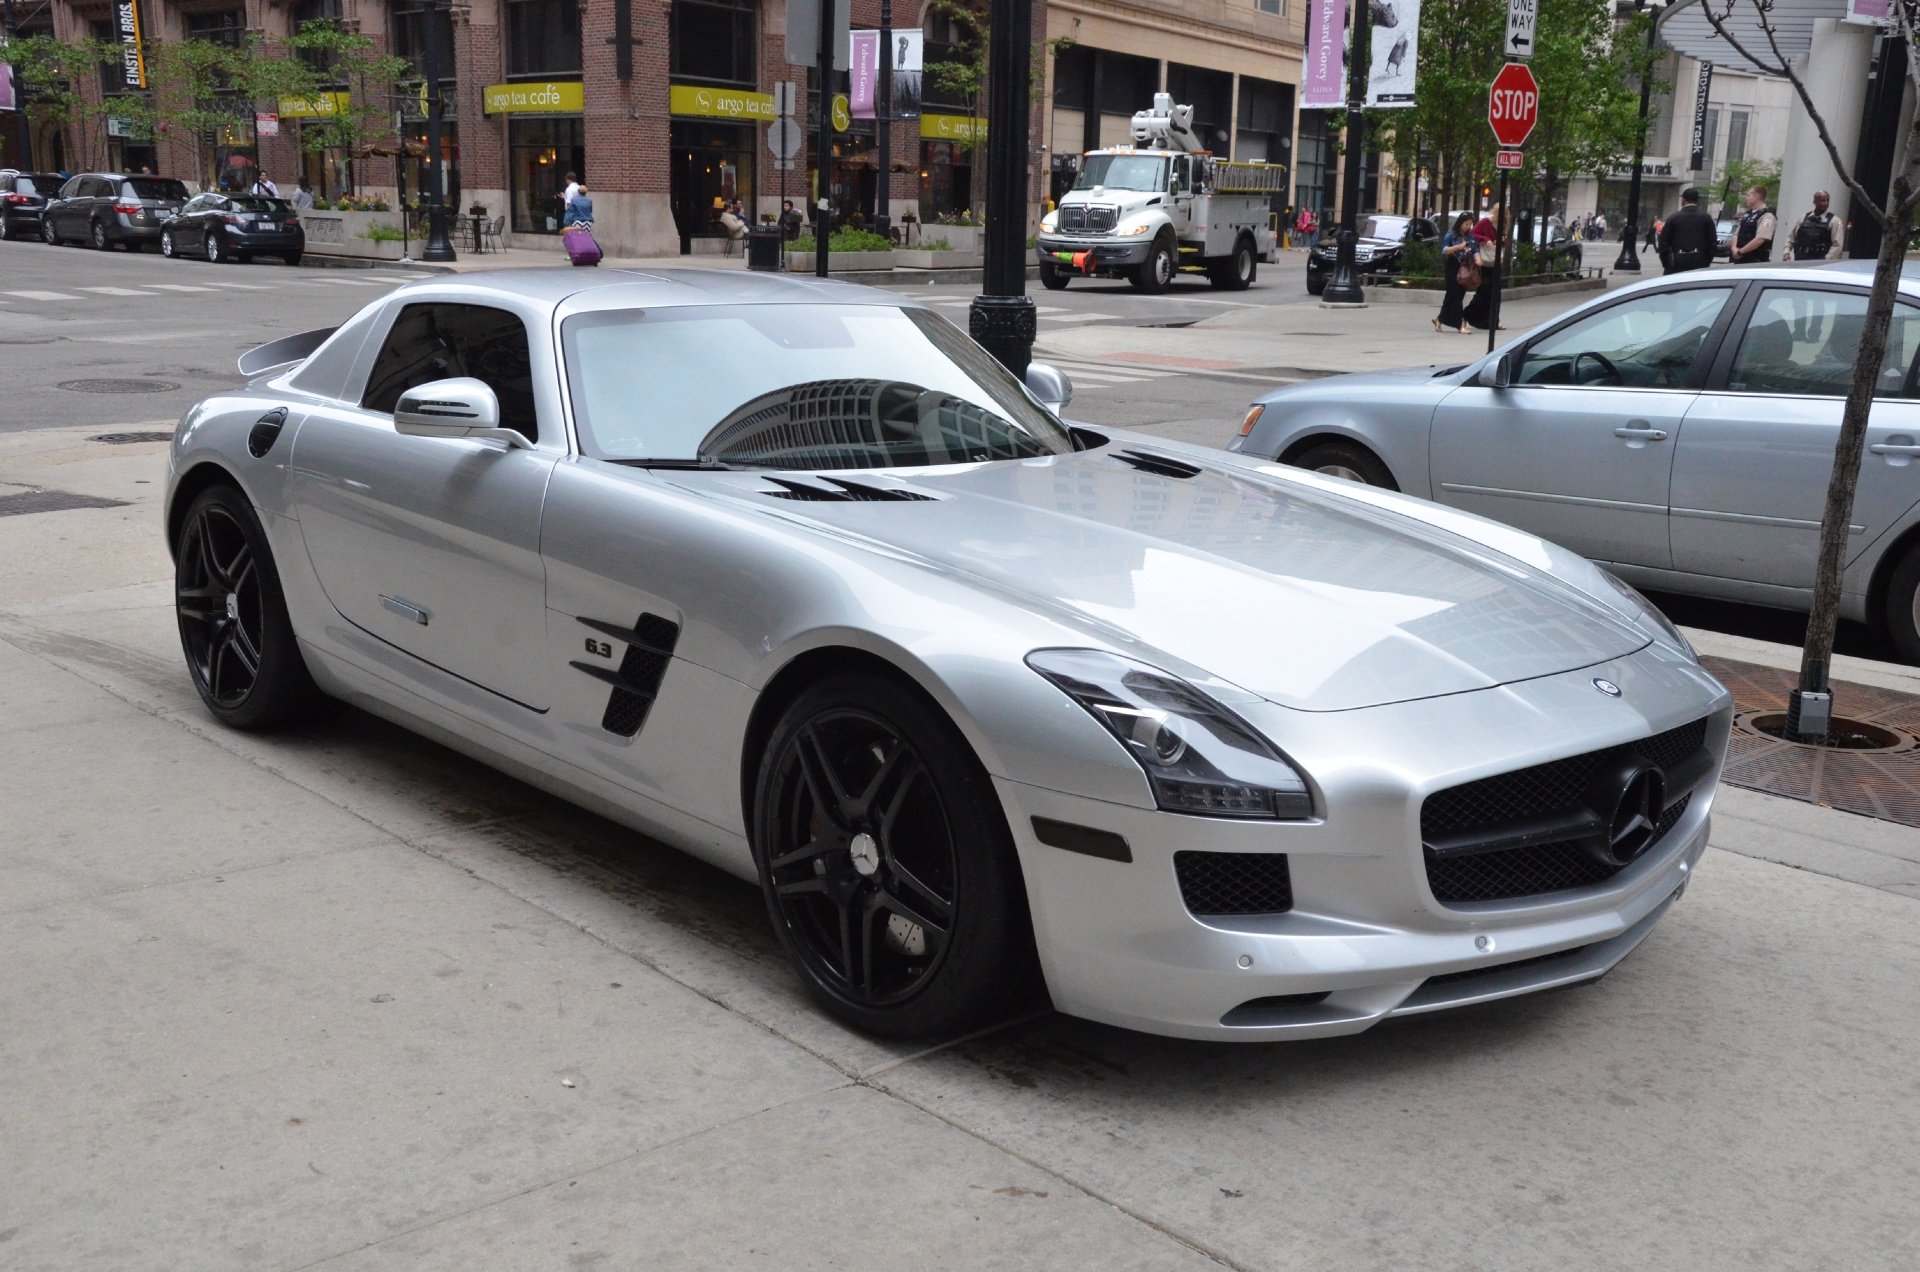 2011, Mercedes, Sls, Amg, Coupe, Germany, Silve Wallpaper